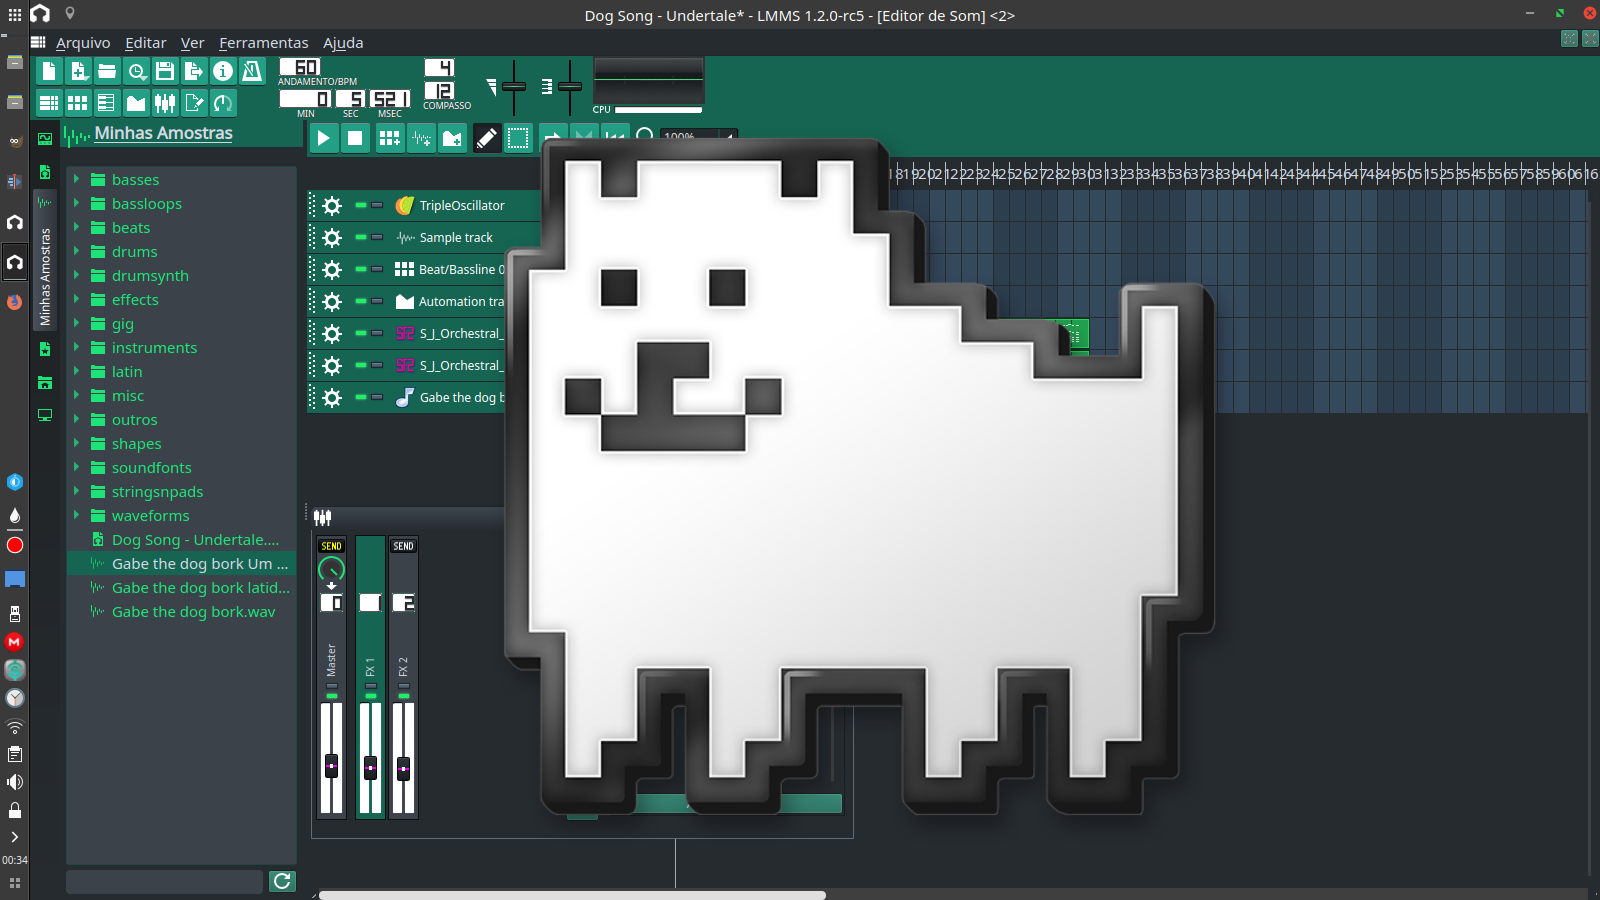 Create Songs With Lmms - Toby Fox , HD Wallpaper & Backgrounds